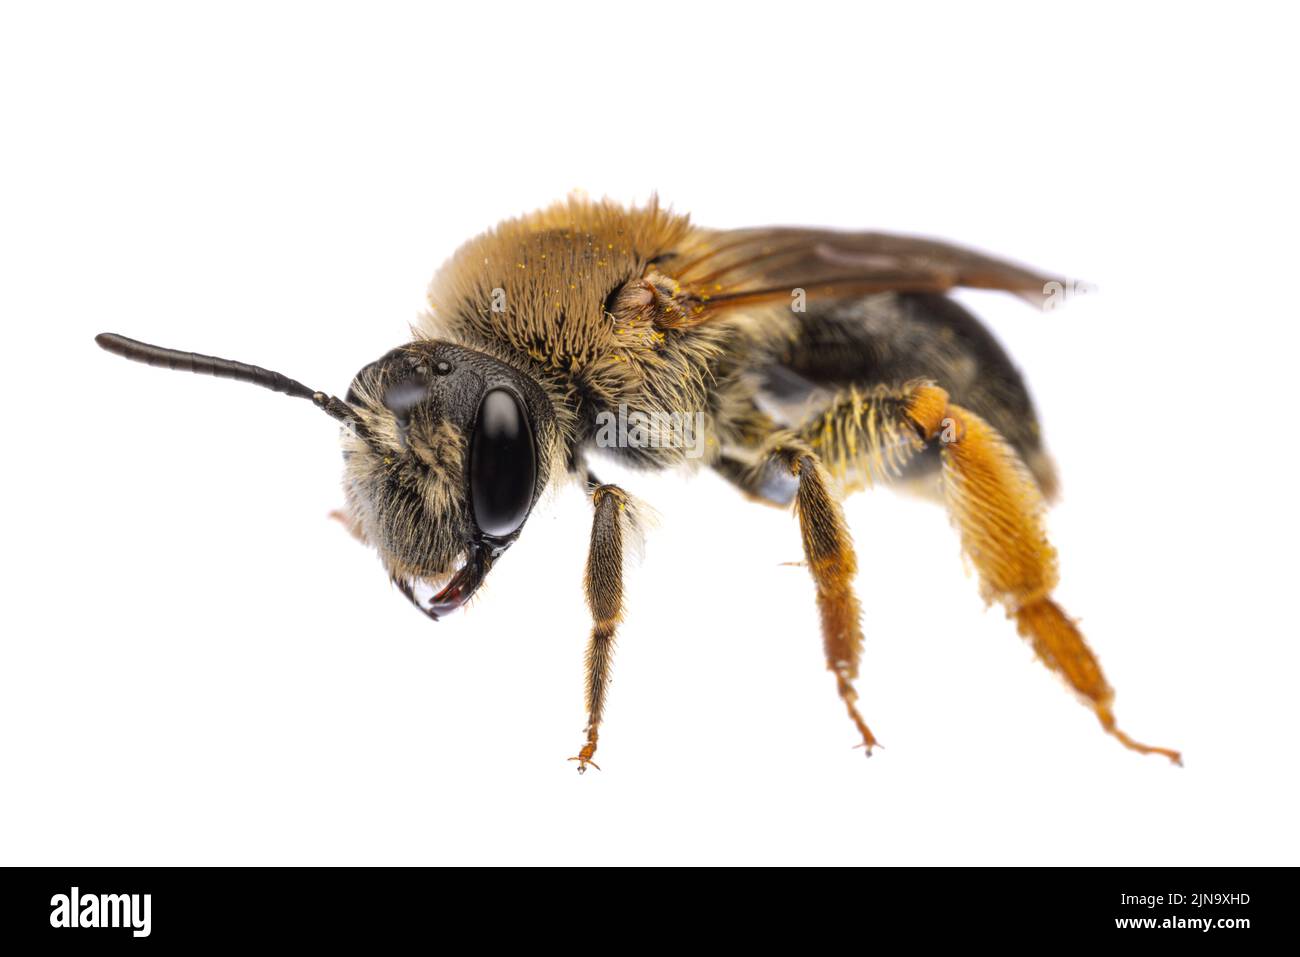 insects of europe - bees: side view of female Andrena haemorrhoa (german Rotschopfige Sandbiene)  isolated on white background Stock Photo